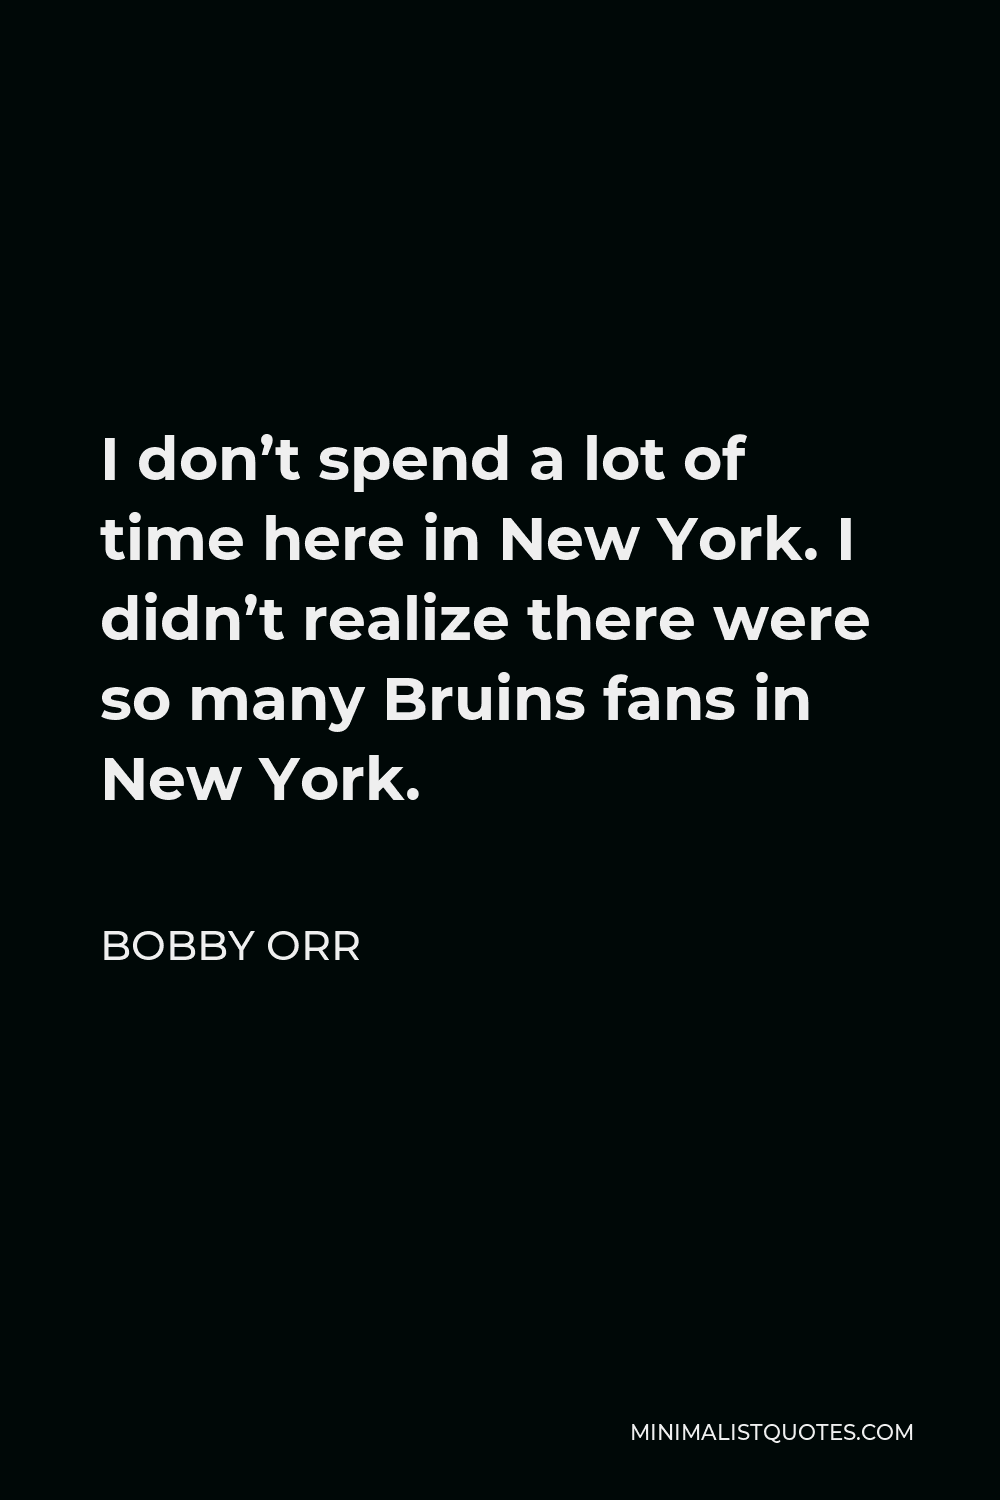 Bobby Orr Quote - I don’t spend a lot of time here in New York. I didn’t realize there were so many Bruins fans in New York.